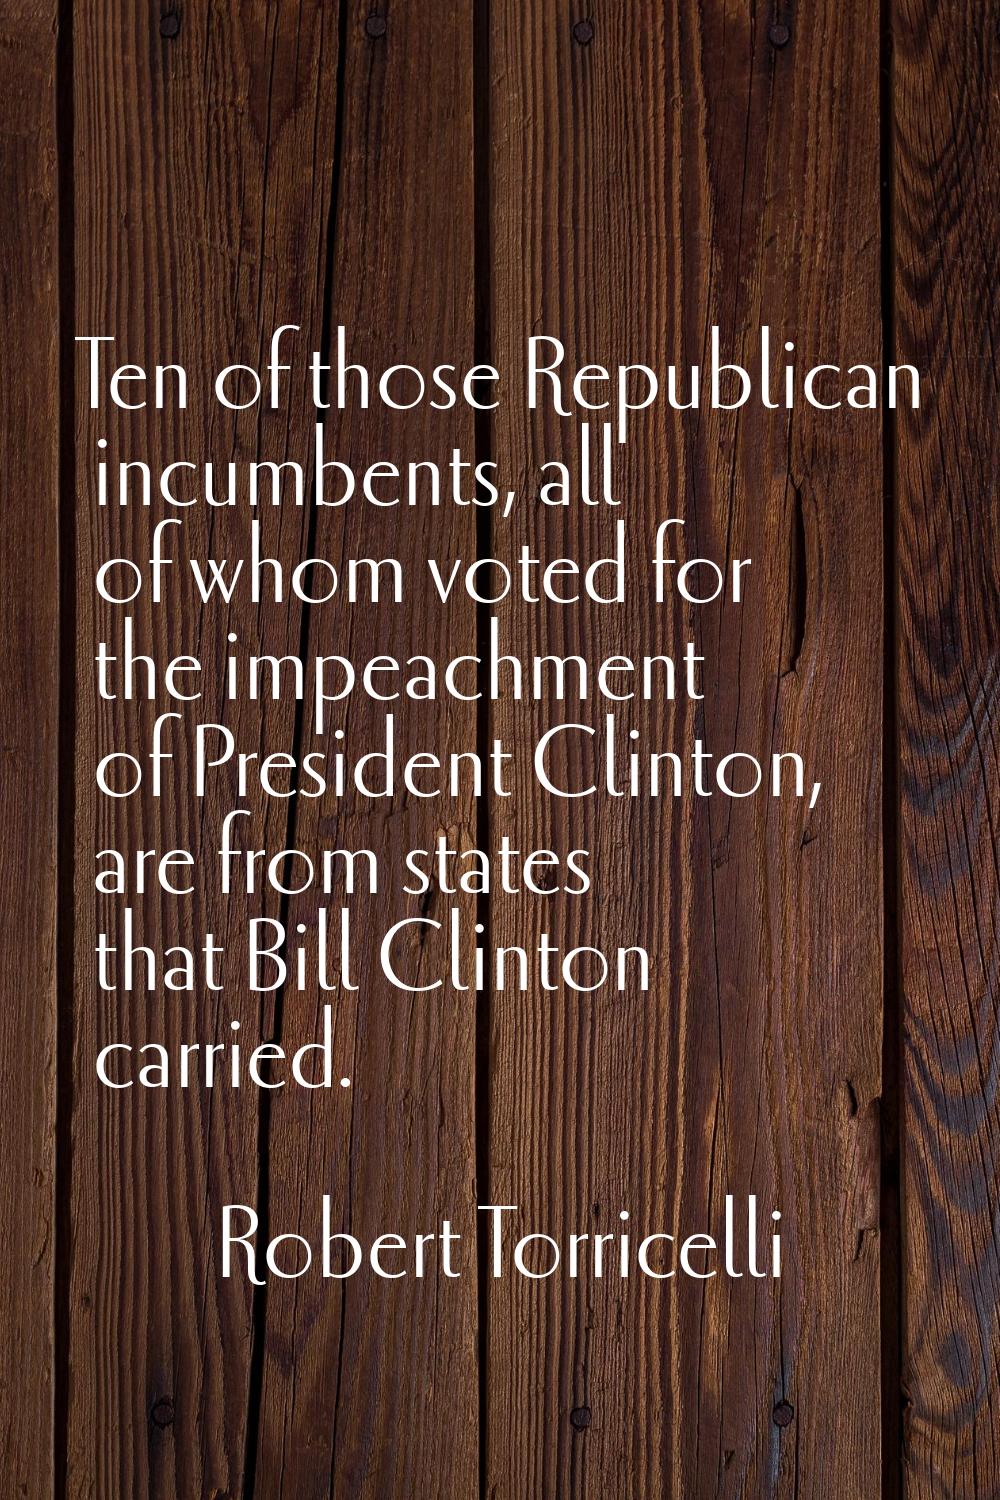 Ten of those Republican incumbents, all of whom voted for the impeachment of President Clinton, are